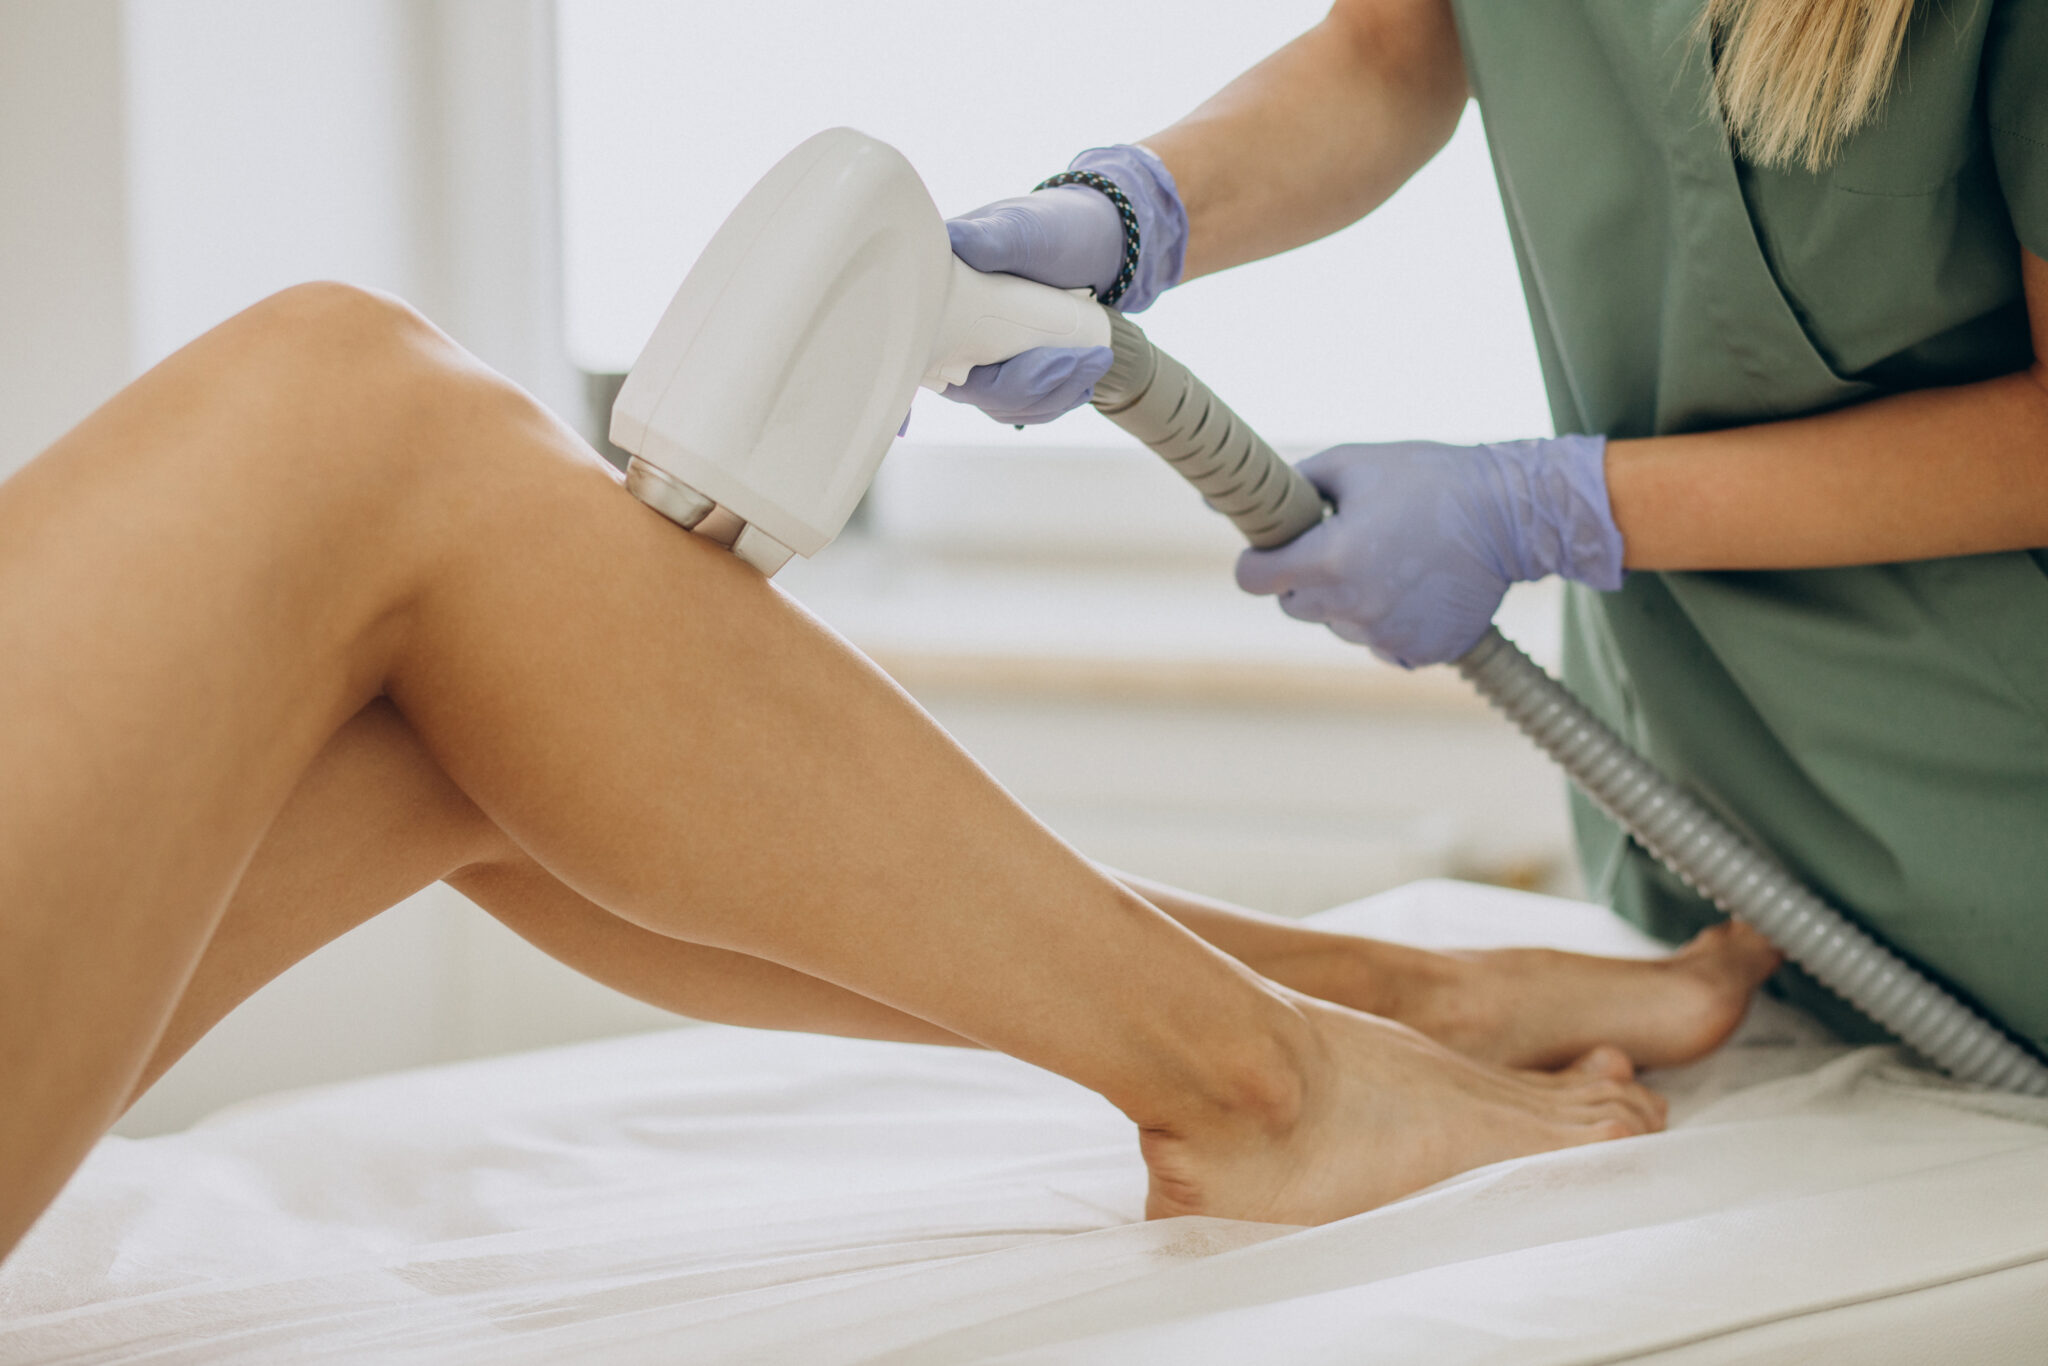 Laser Hair Removal Treatment - Step-By-Step Guide | Bodycraft